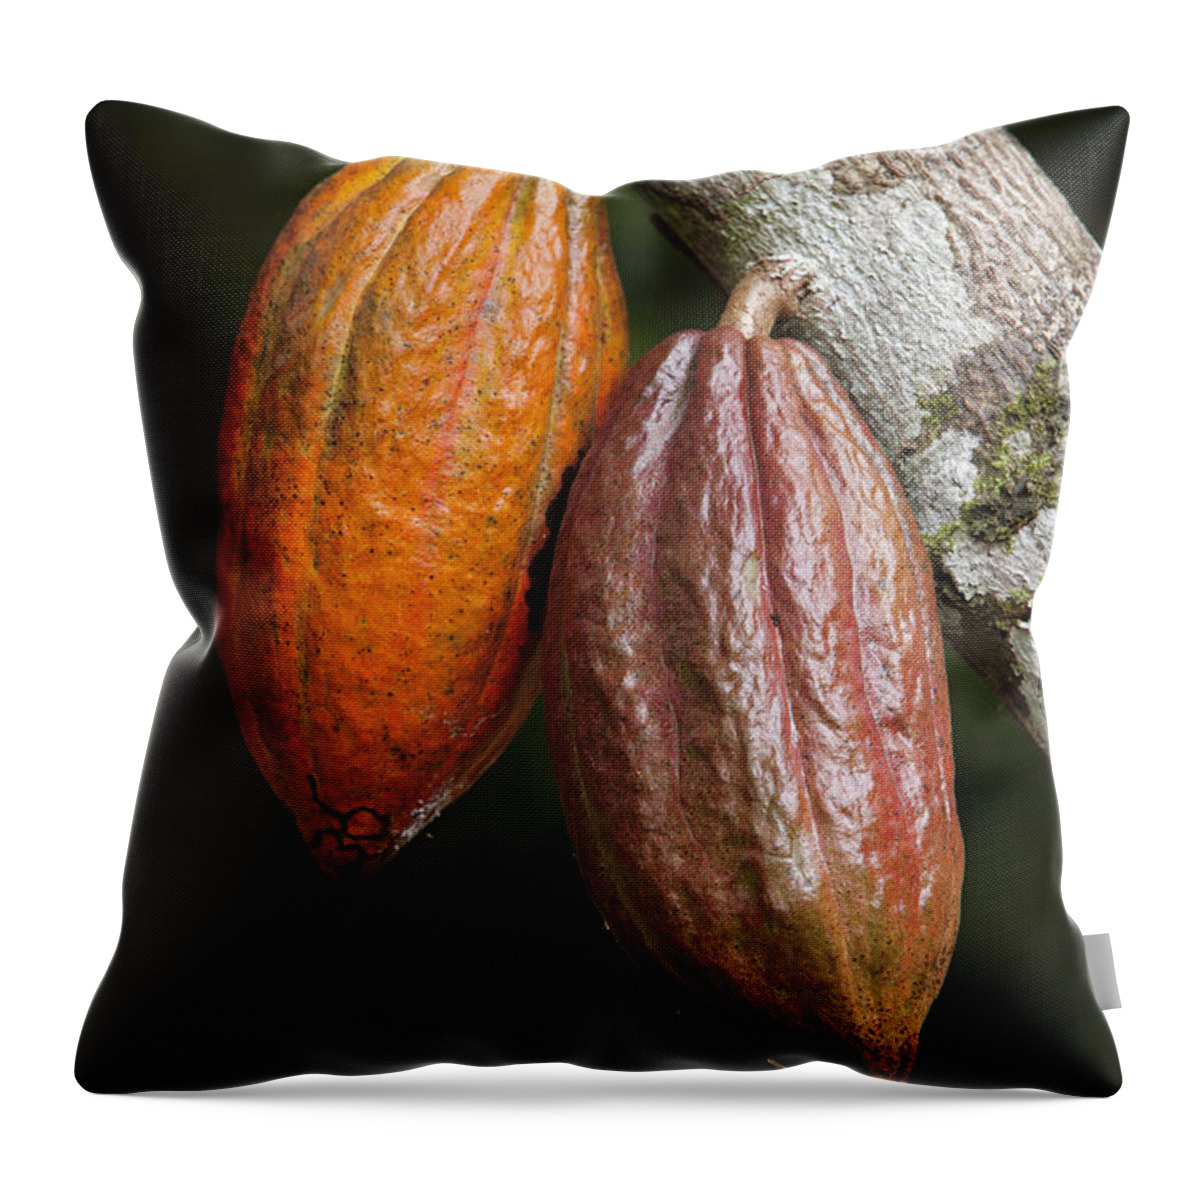 536596 Throw Pillow featuring the photograph Cocoa Fruit Brazil by Ingo Arndt